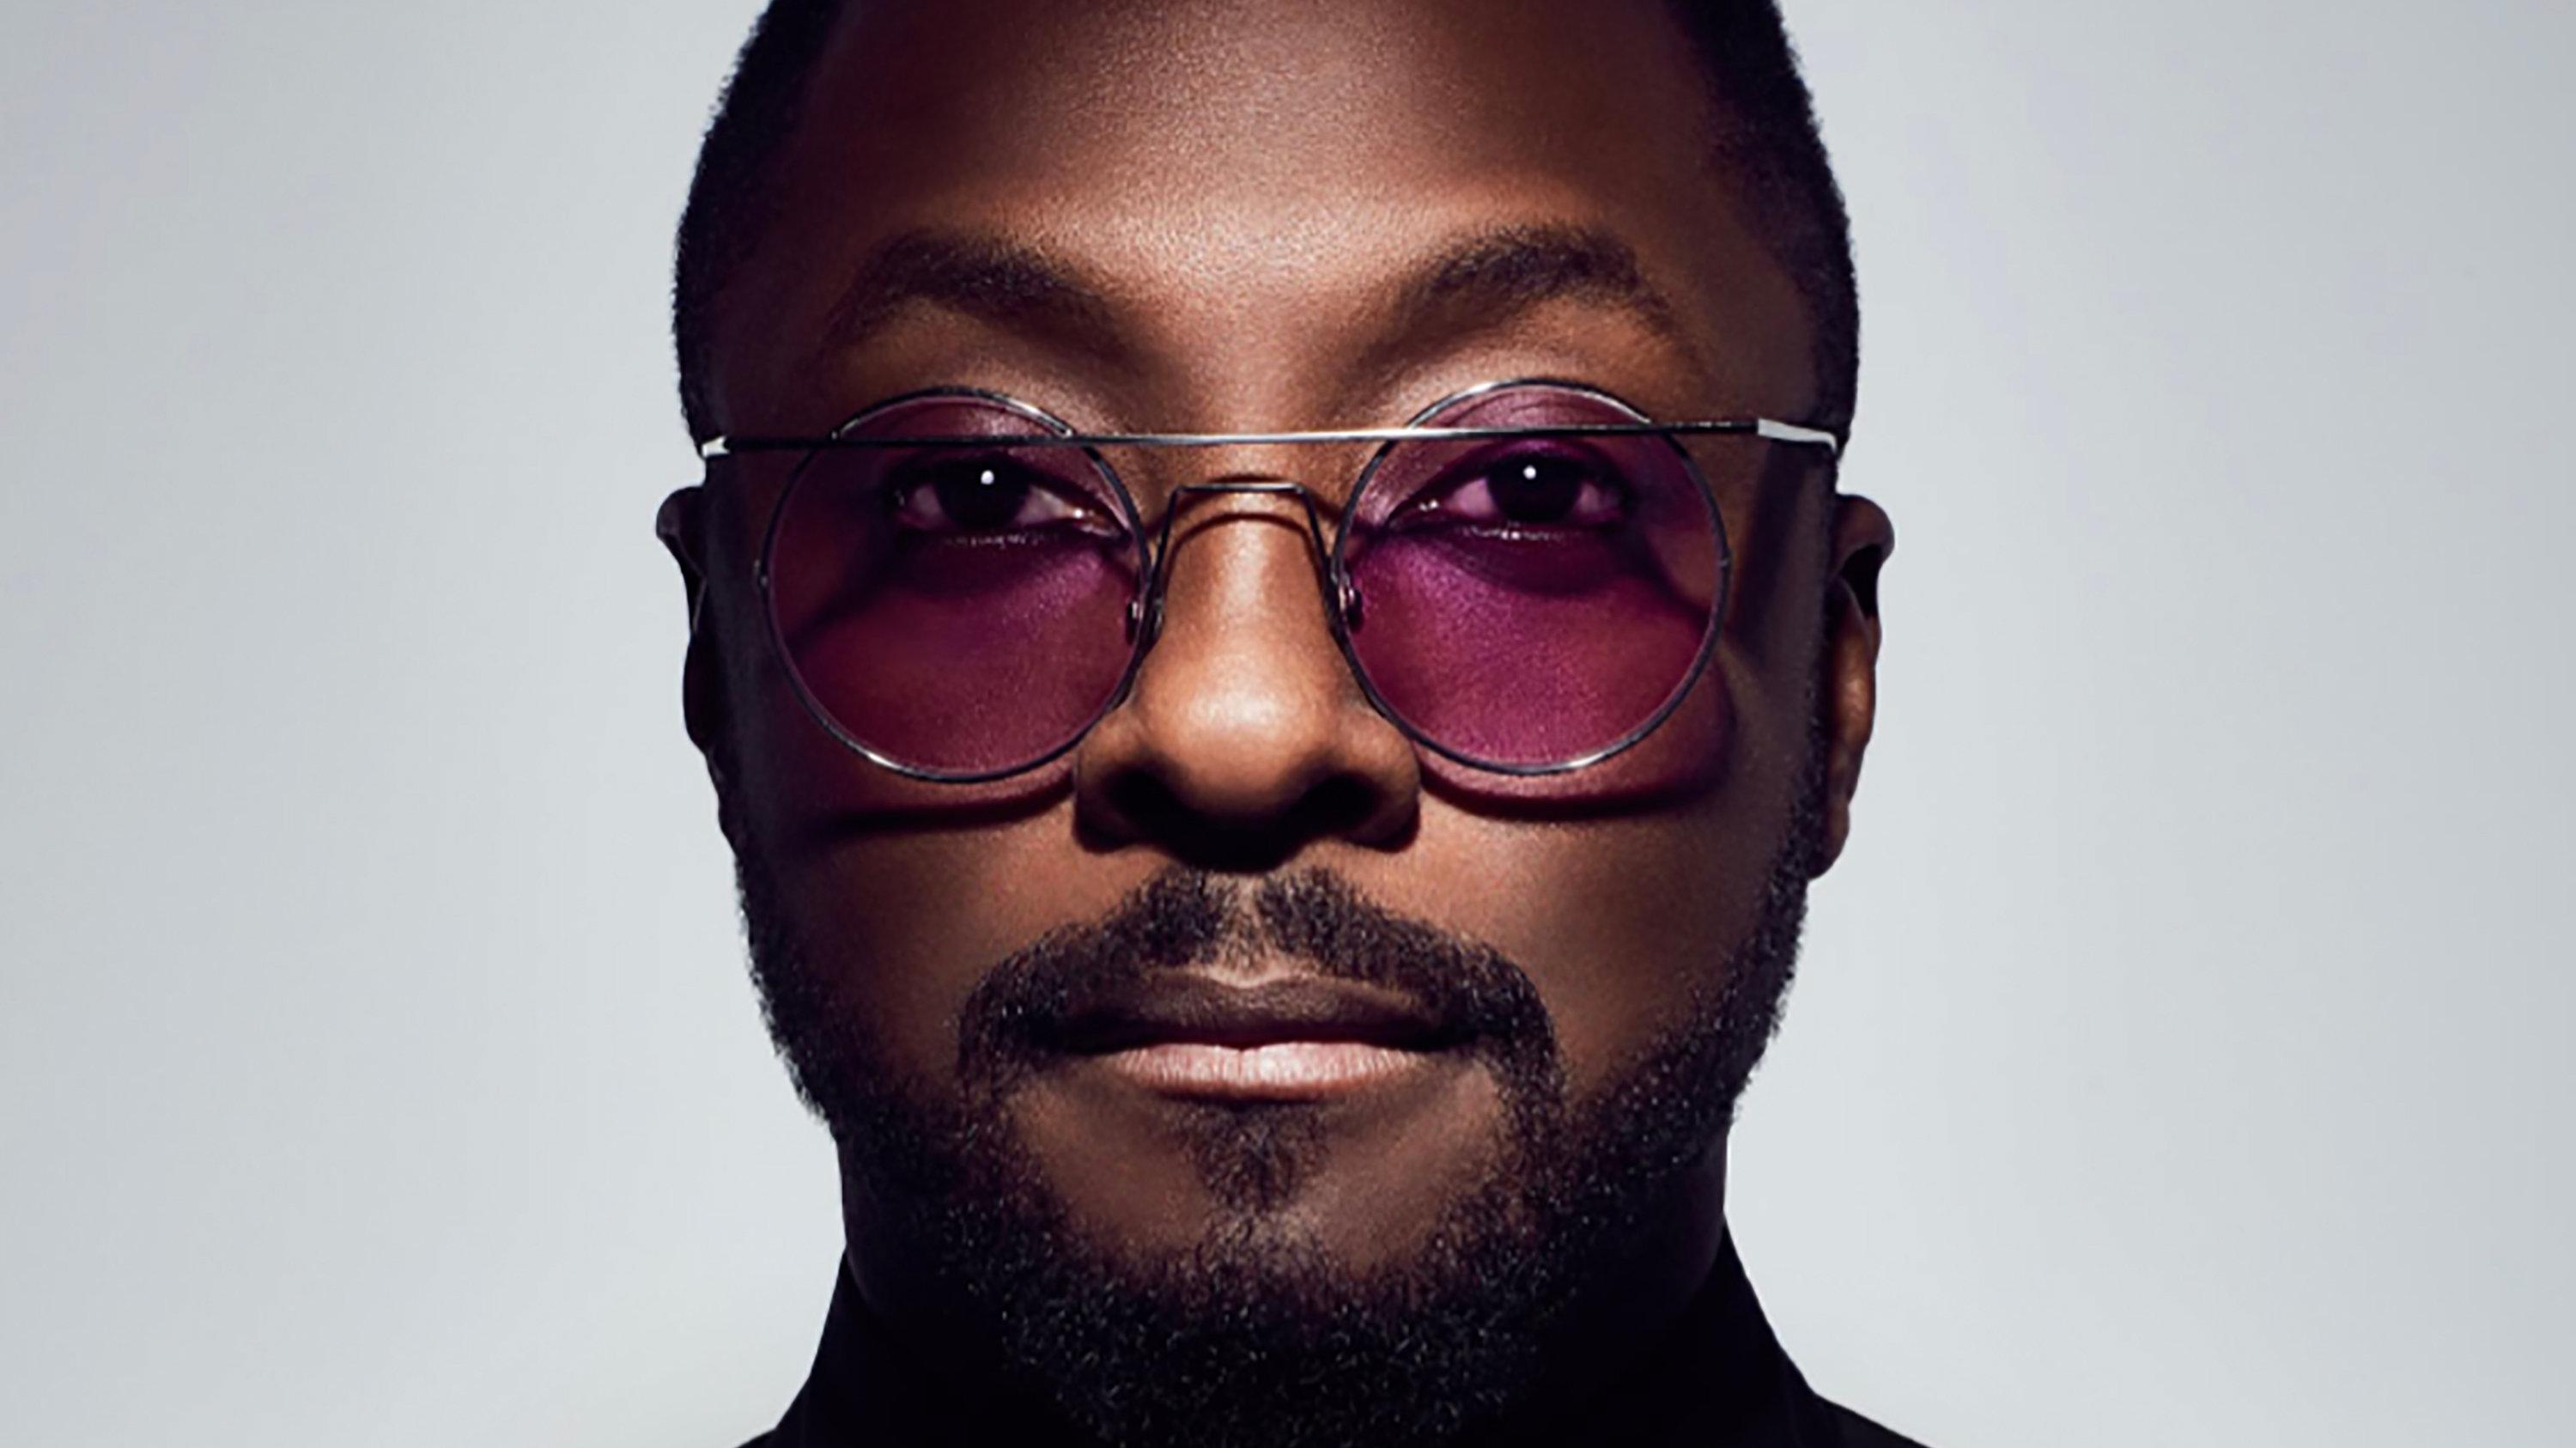 7-TIME GRAMMY WINNER, WILL.I.AM, HEADLINES SKY-HIGH STAGE AT PRIVILEGE THIS WEEK